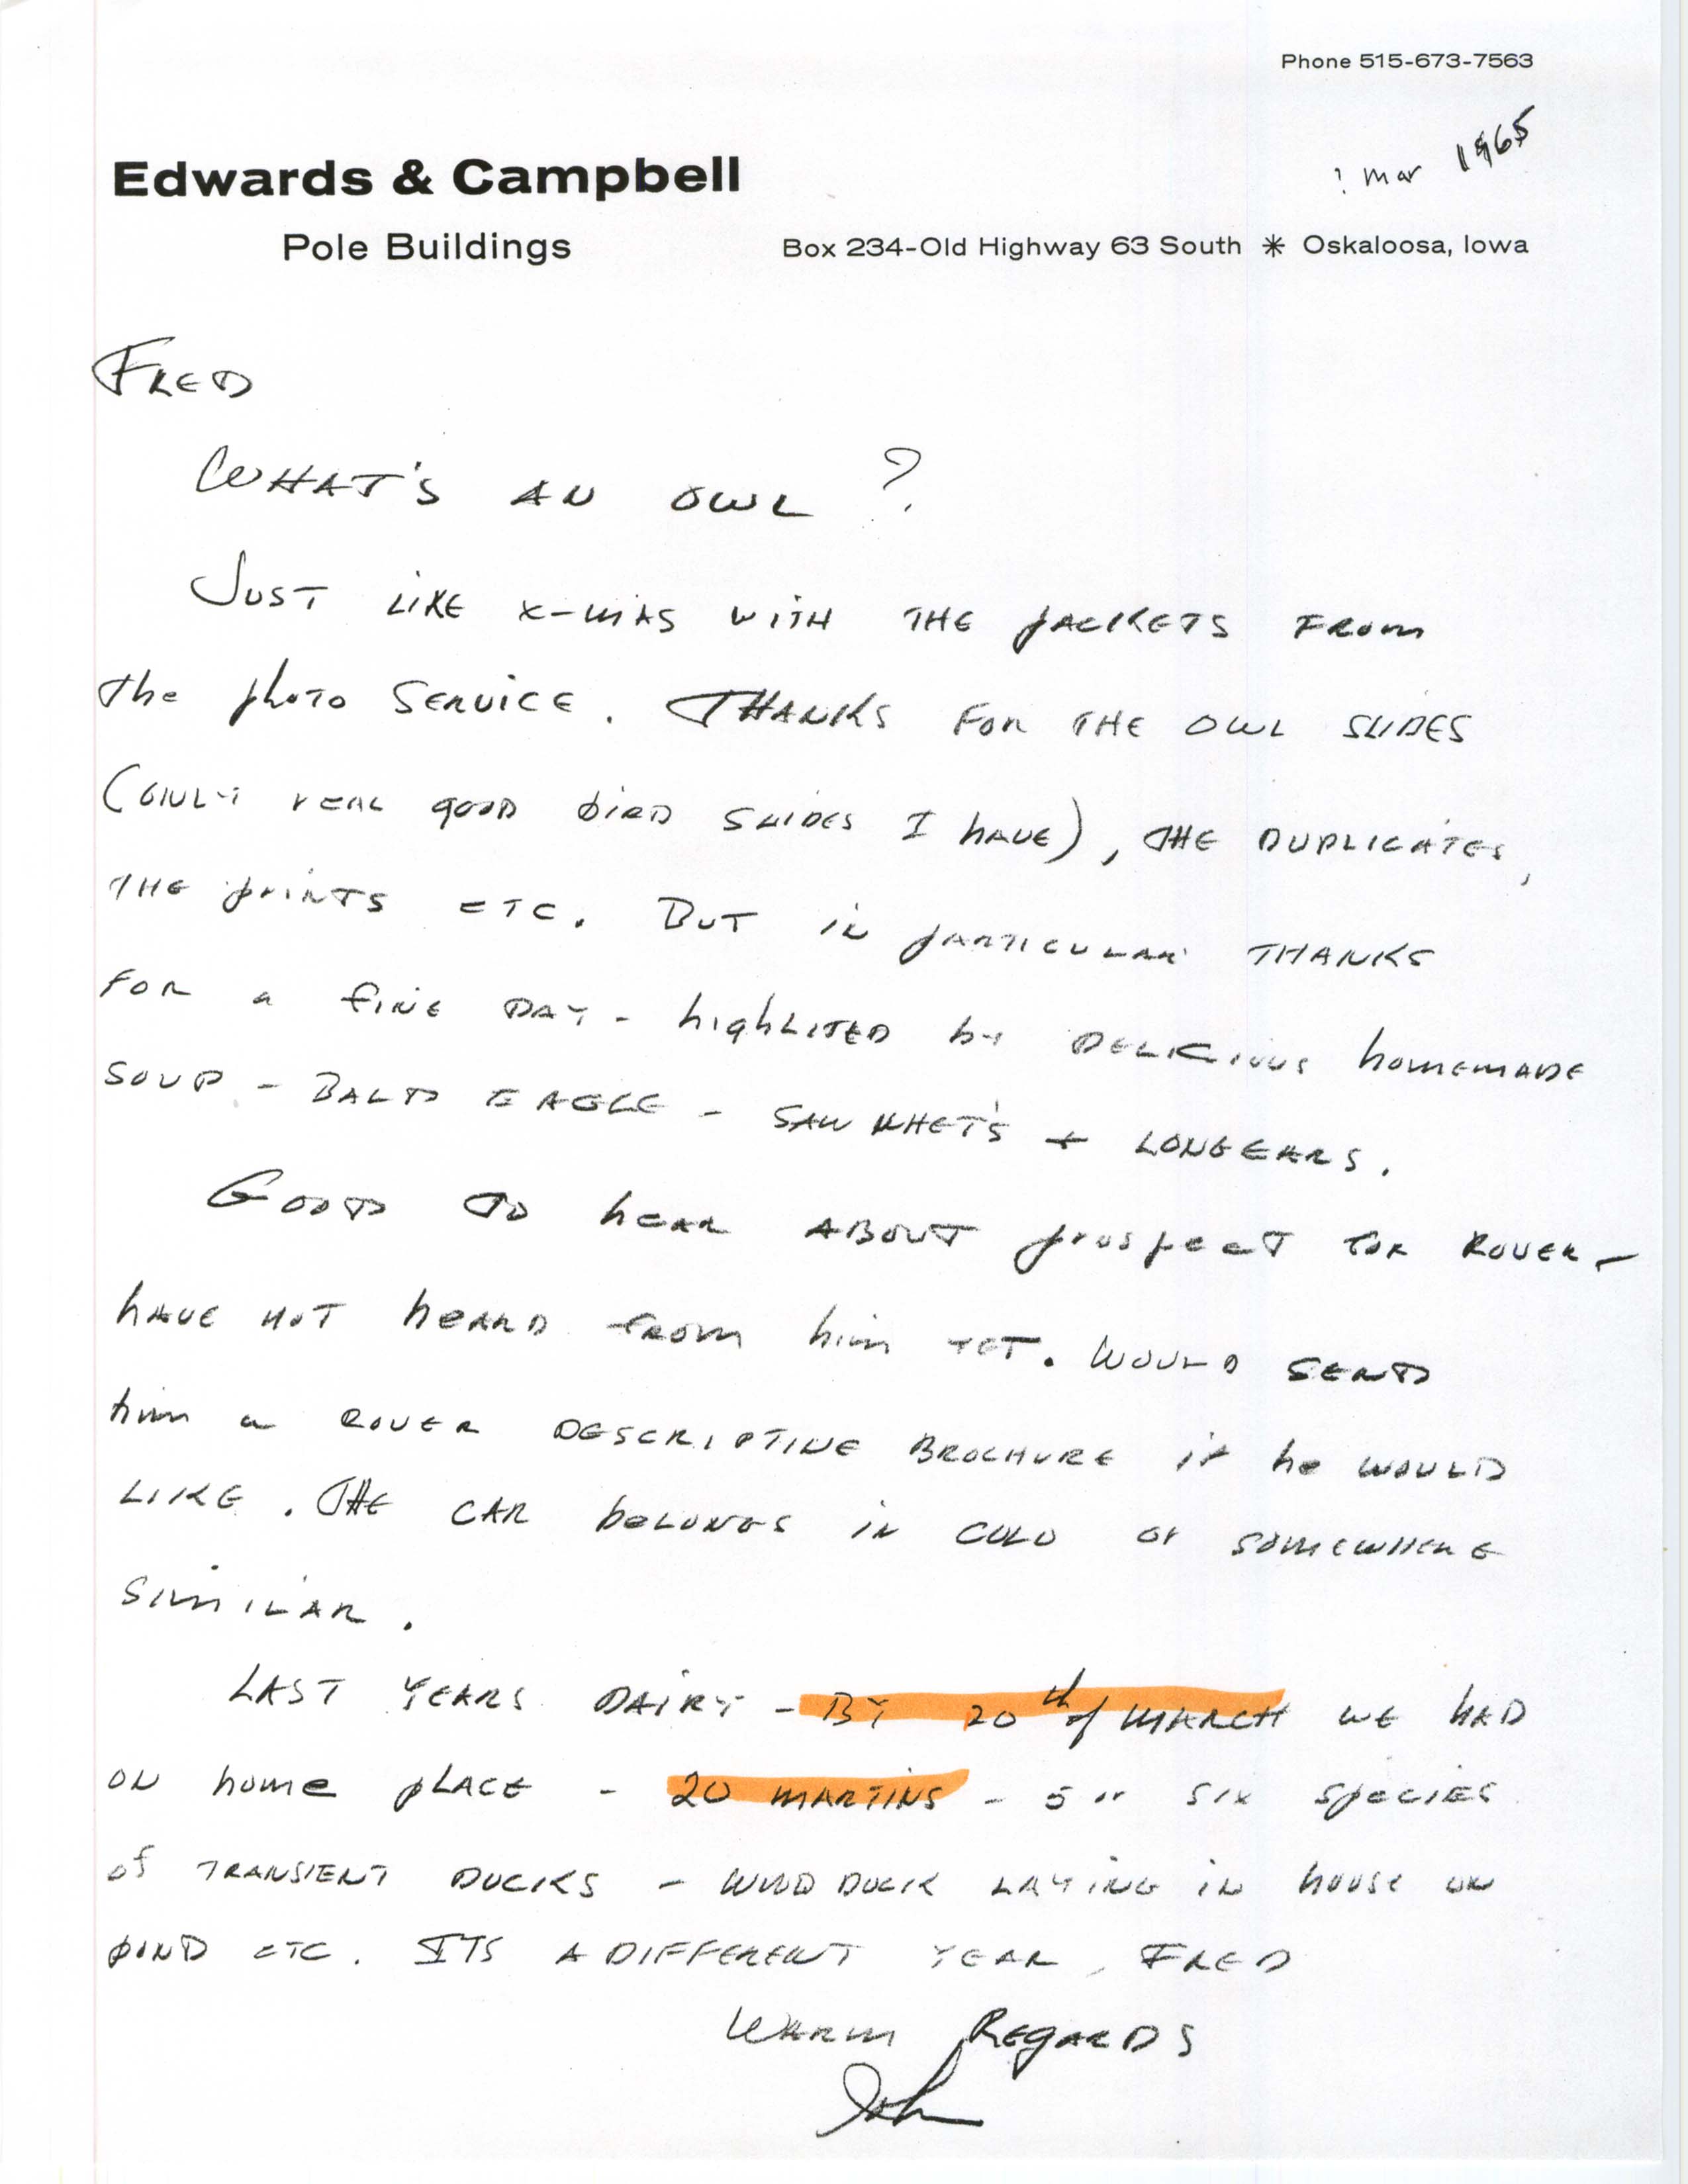 John letter to Fred Kent regarding bird sightings and owl slides, March 1965